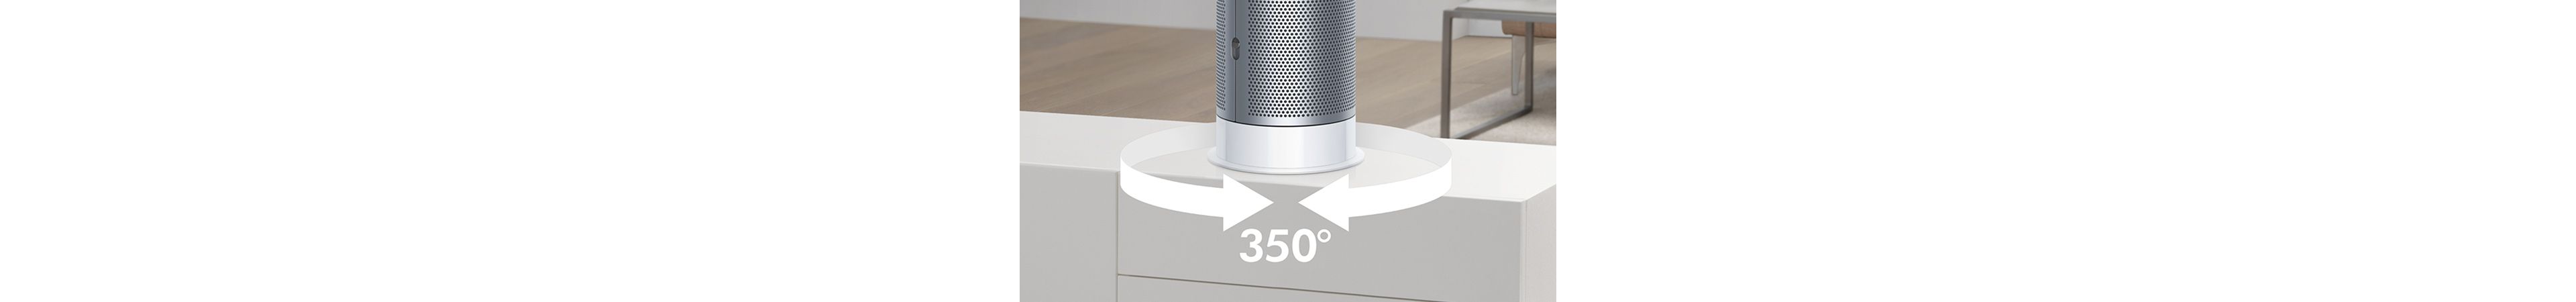 Dyson cool and heat purifier